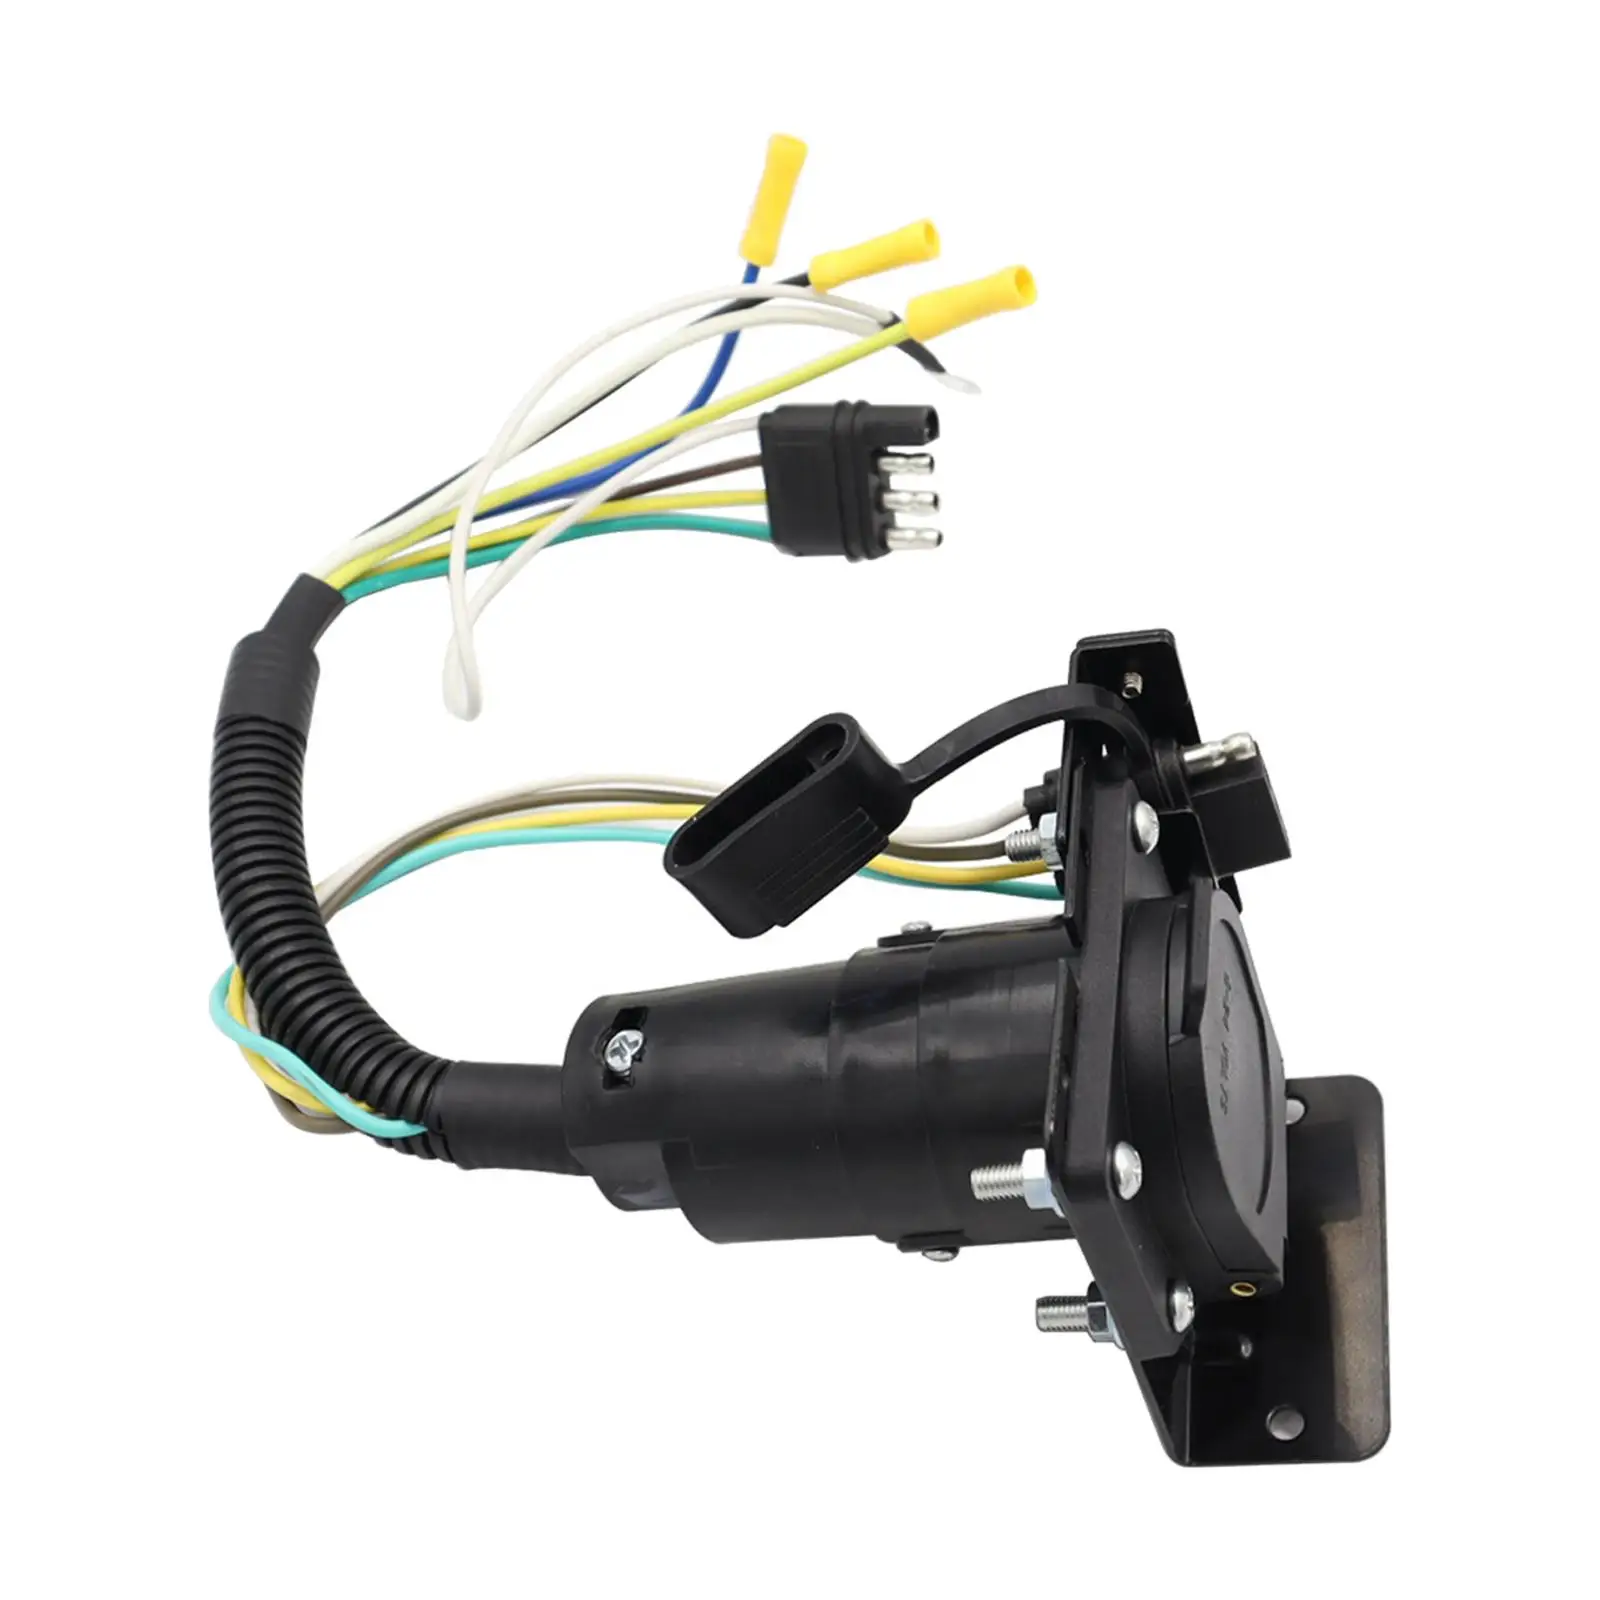 Trailer Wiring Adapter Replaces with Mounting Bracket Durable for Caravan Camper